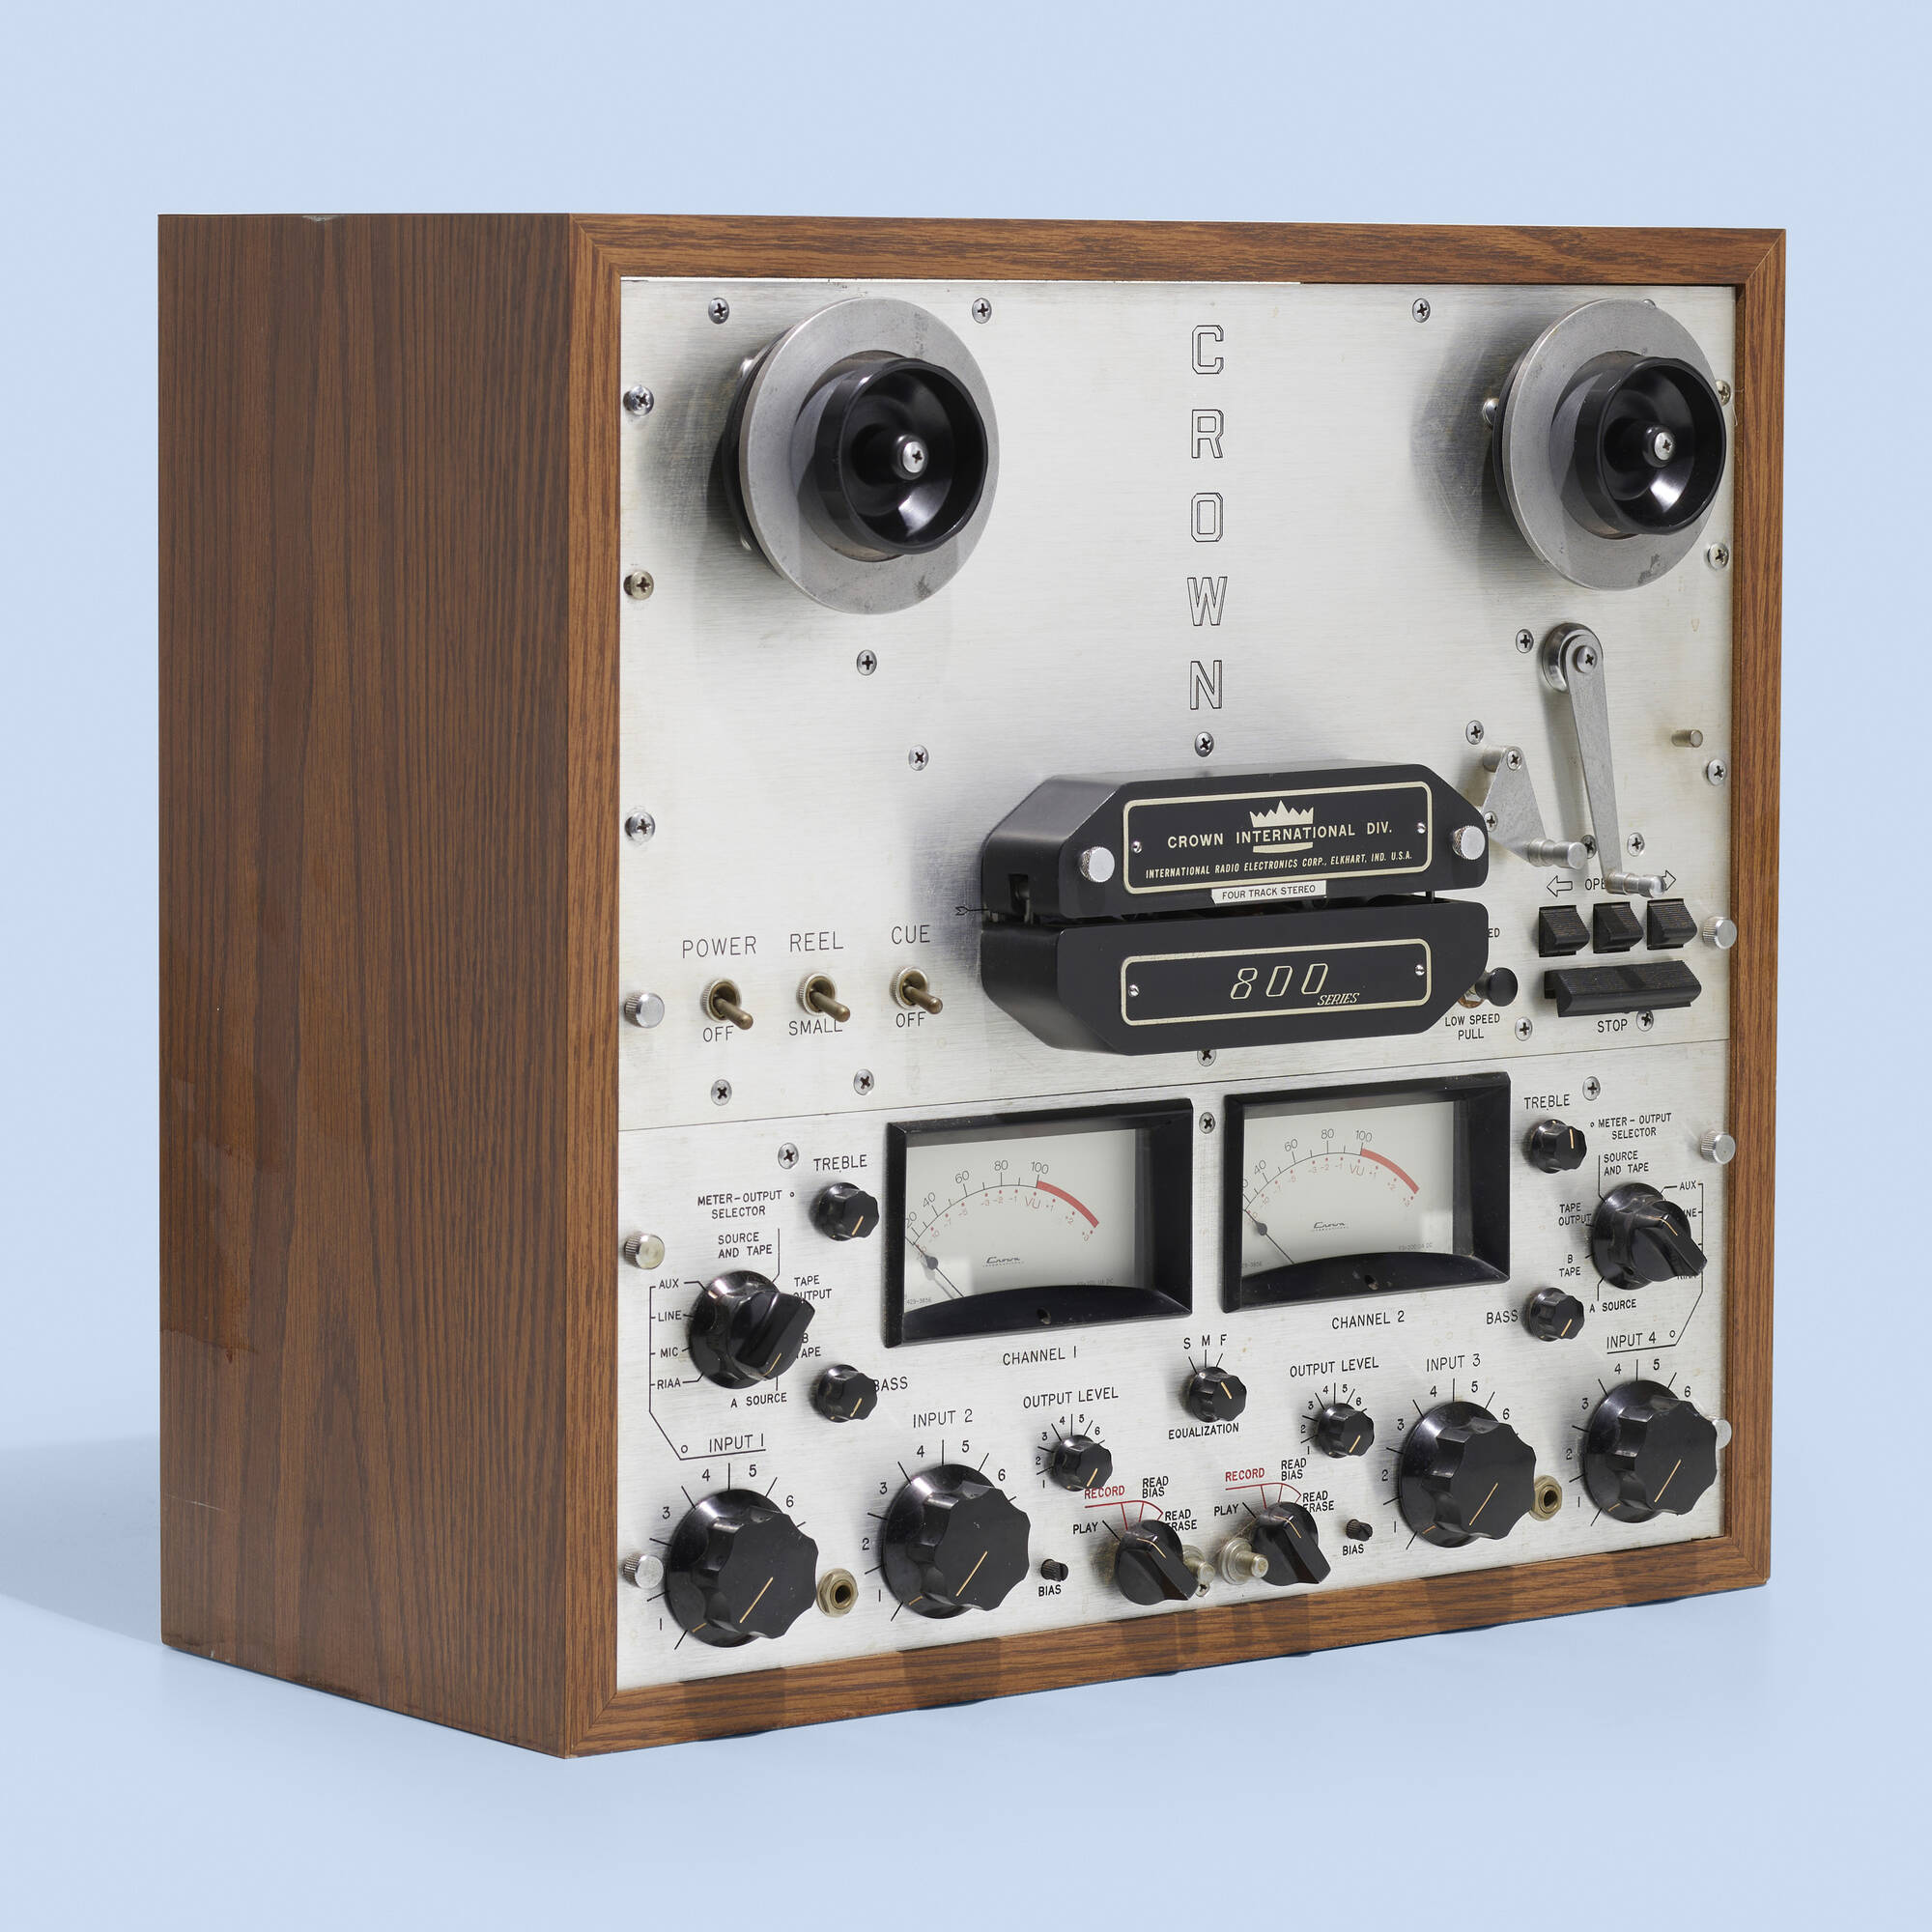 168: CROWN AUDIO, INC., 800 reel-to-reel four-track stereo tape deck,  serial no. S-269 < American Design Online, 25 February 2022 < Auctions